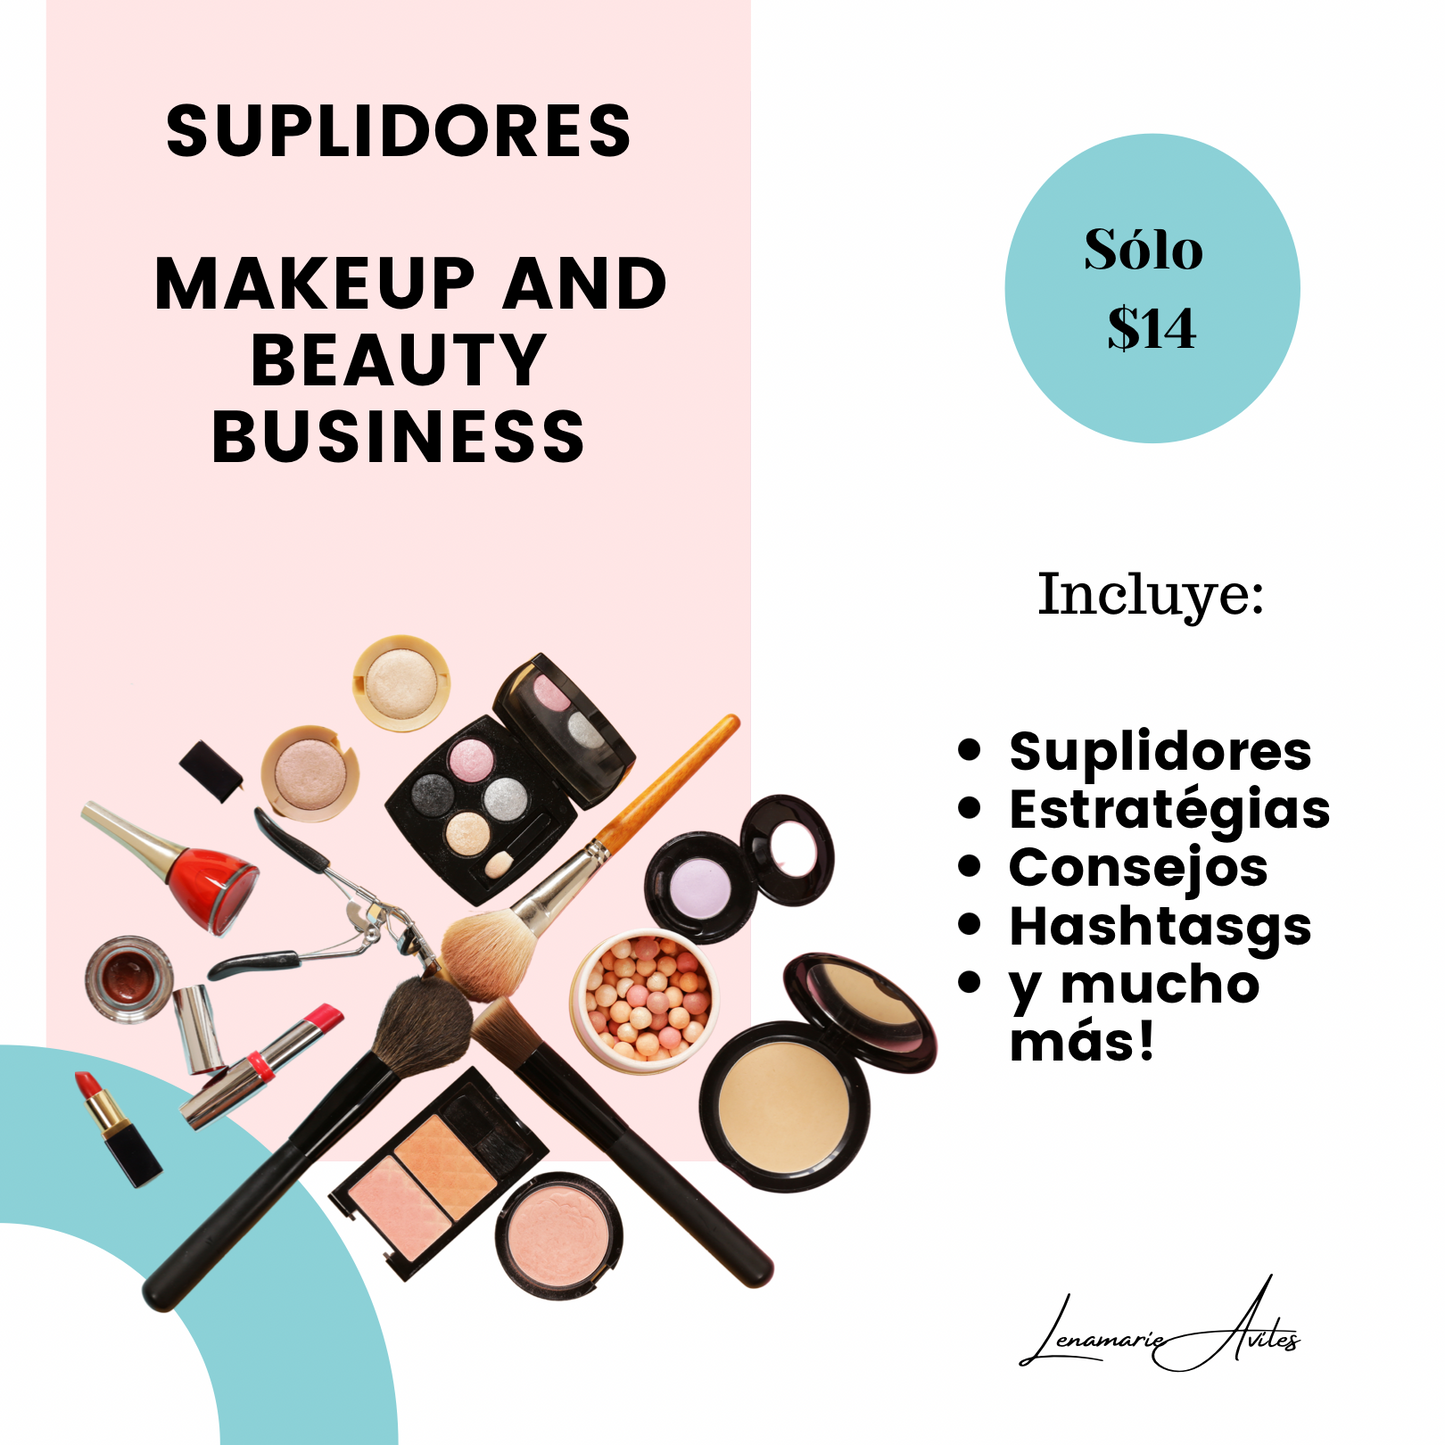 Suplidores Makeup and Beauty Business